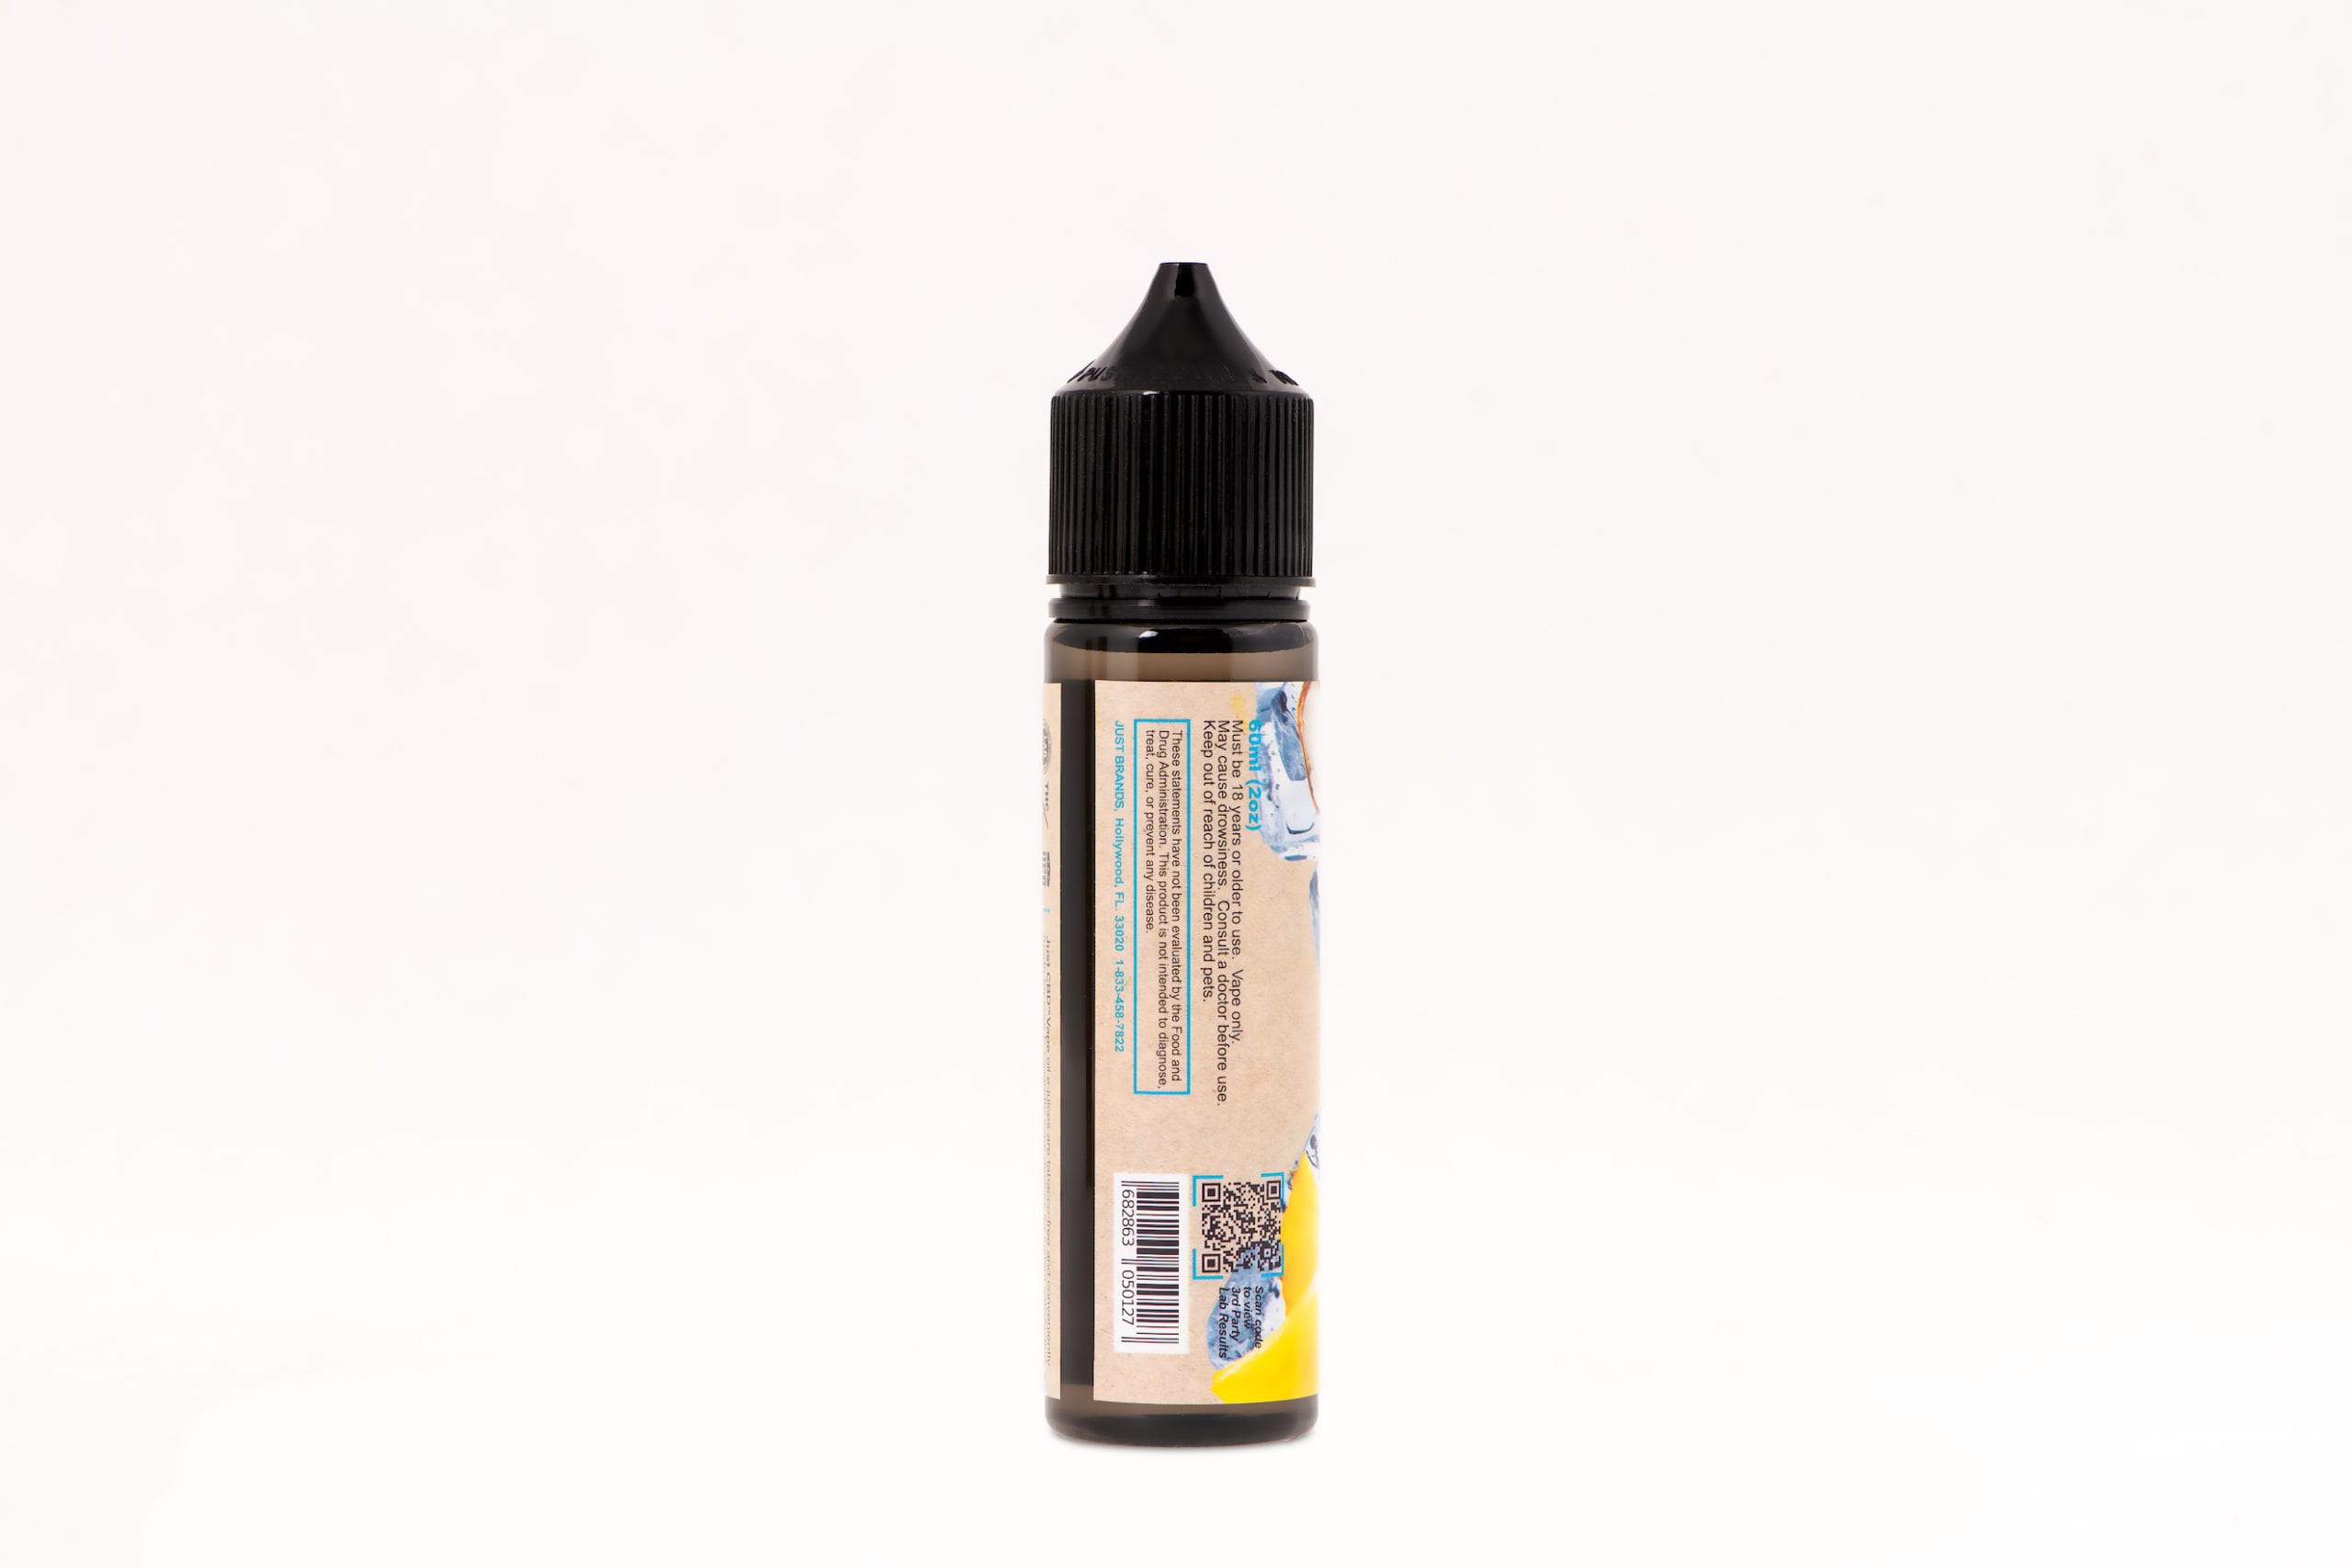 JustCBD Product Photography and Just CBD Products